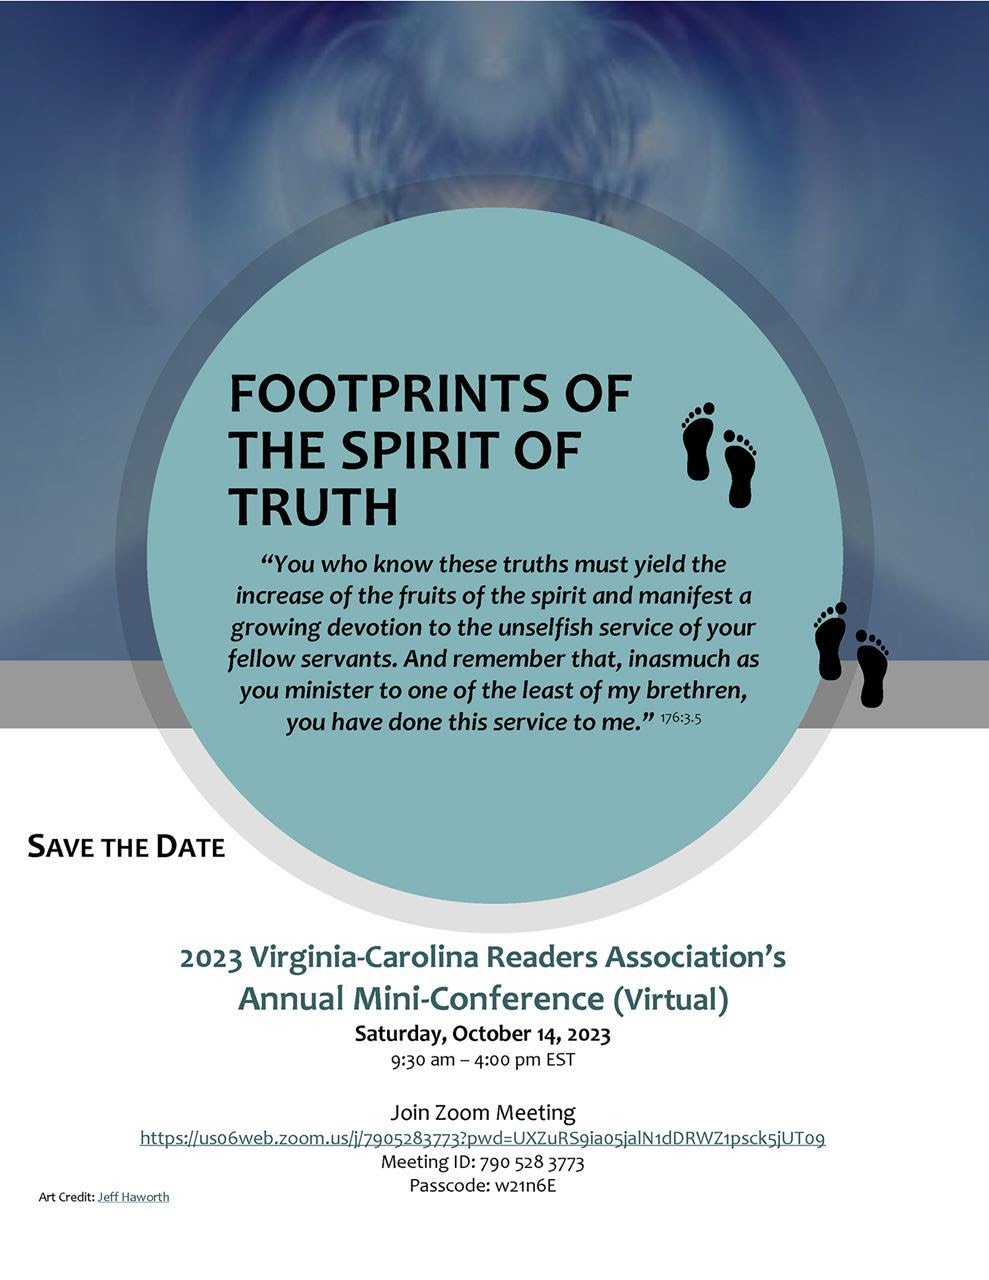 Footprints of the Spirit of Truth Urantia Conference